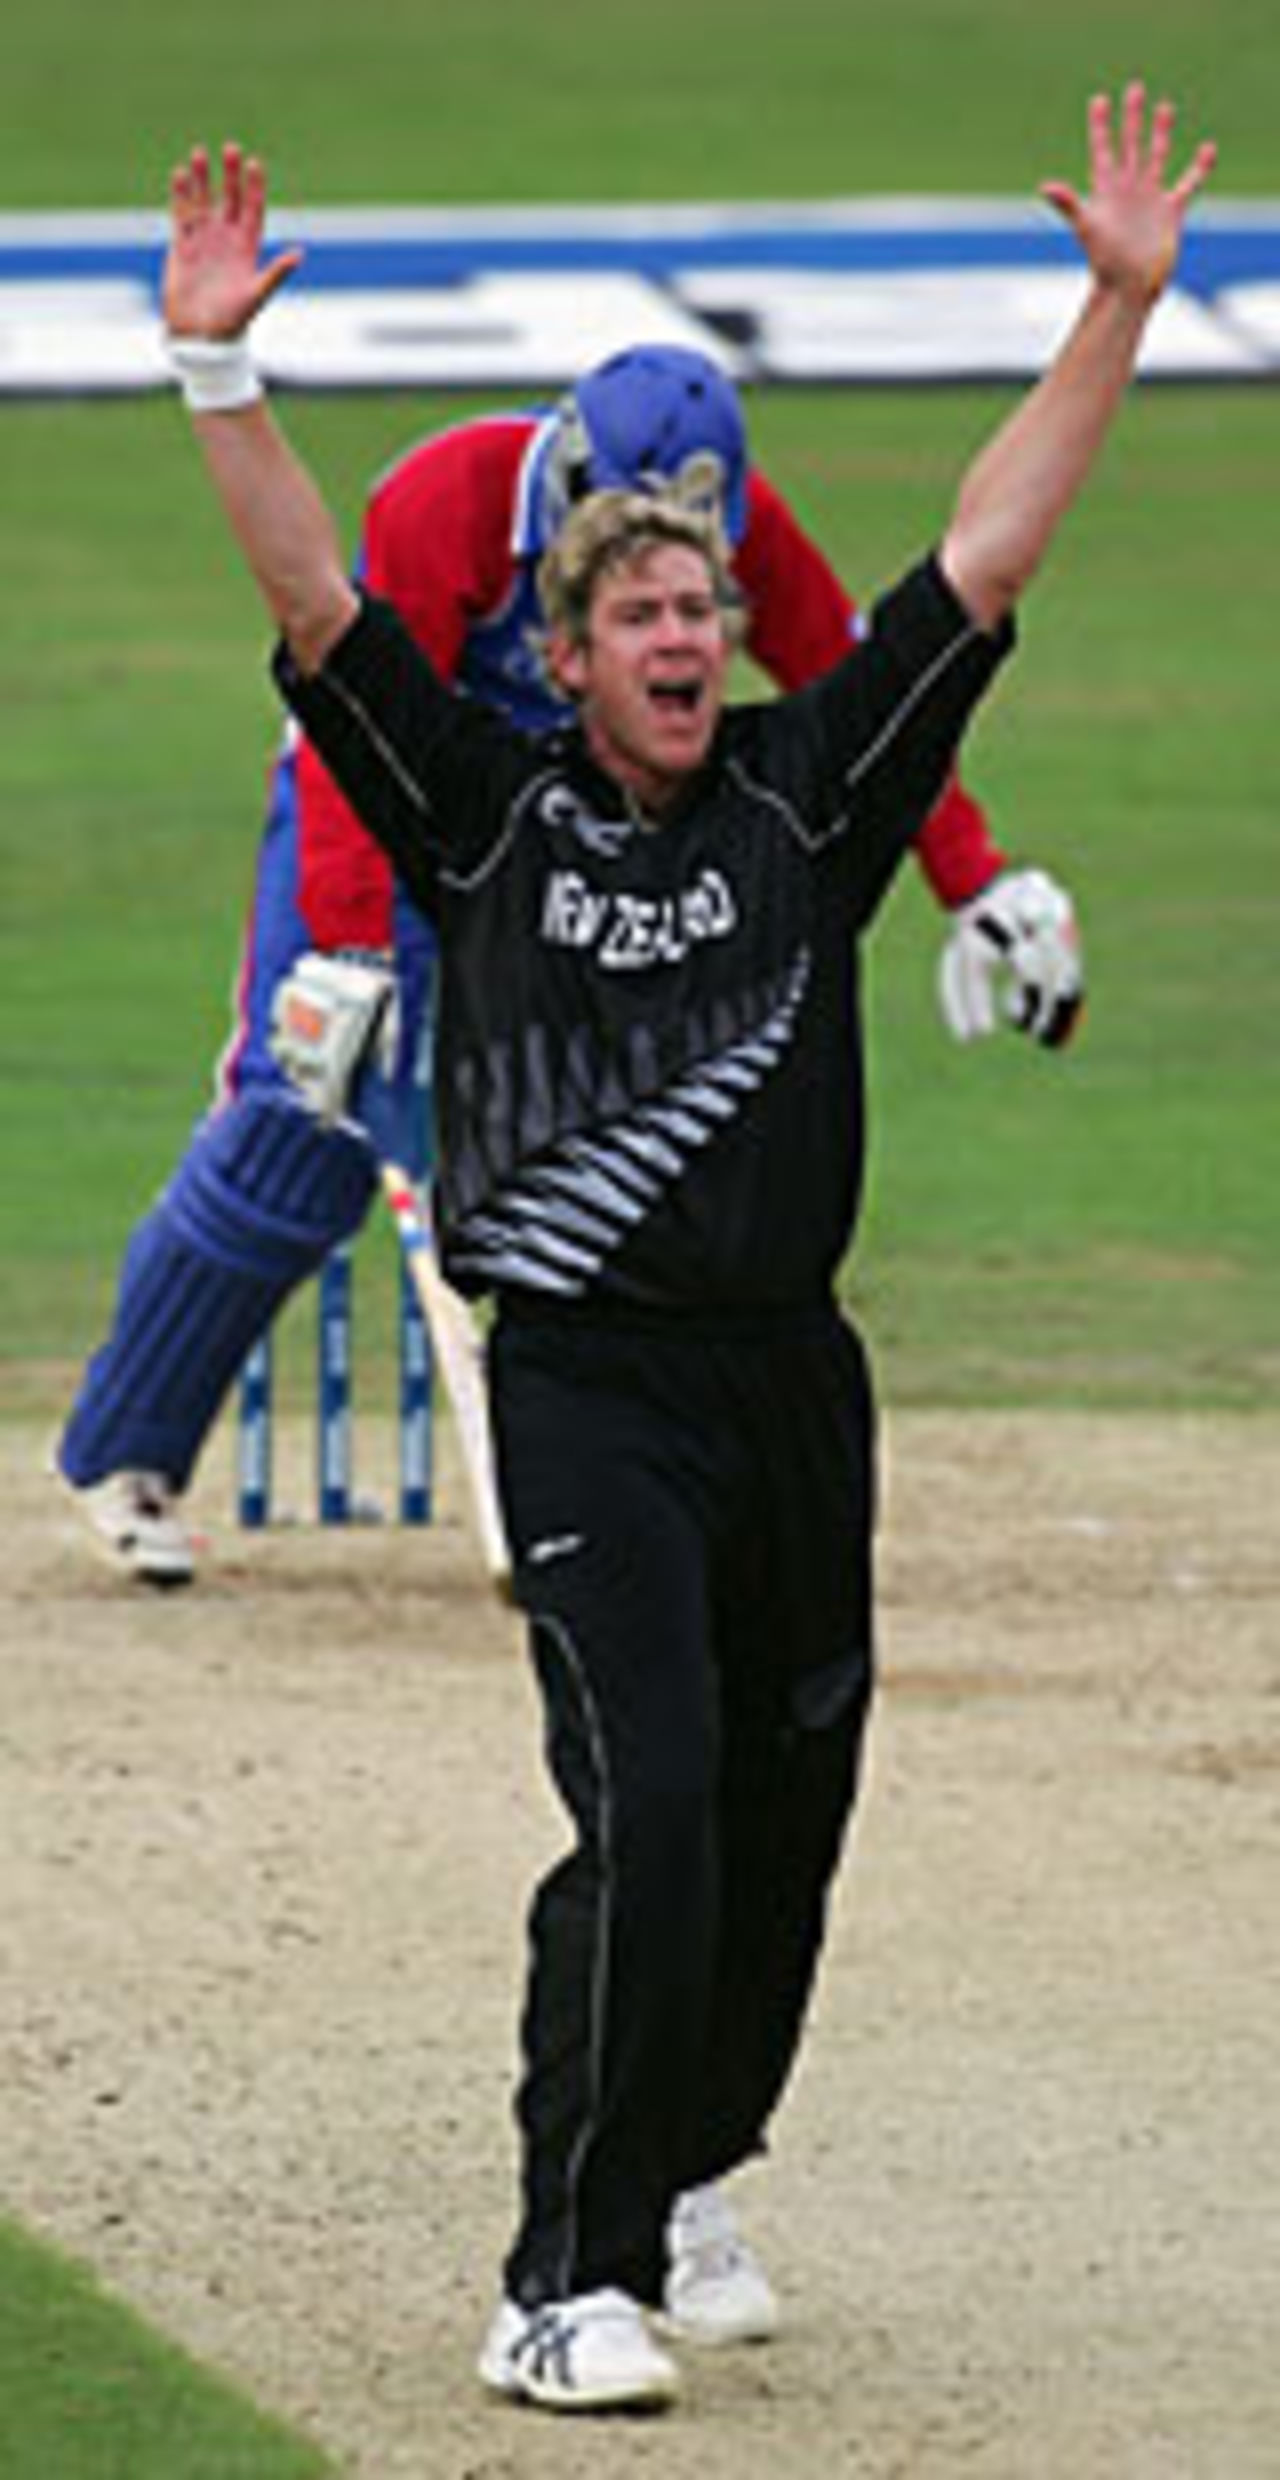 Jacon Oram traps Rohan Alexander lbw on his way to 5 for 39, New Zealand v USA, Champions Trophy, September 10 2004